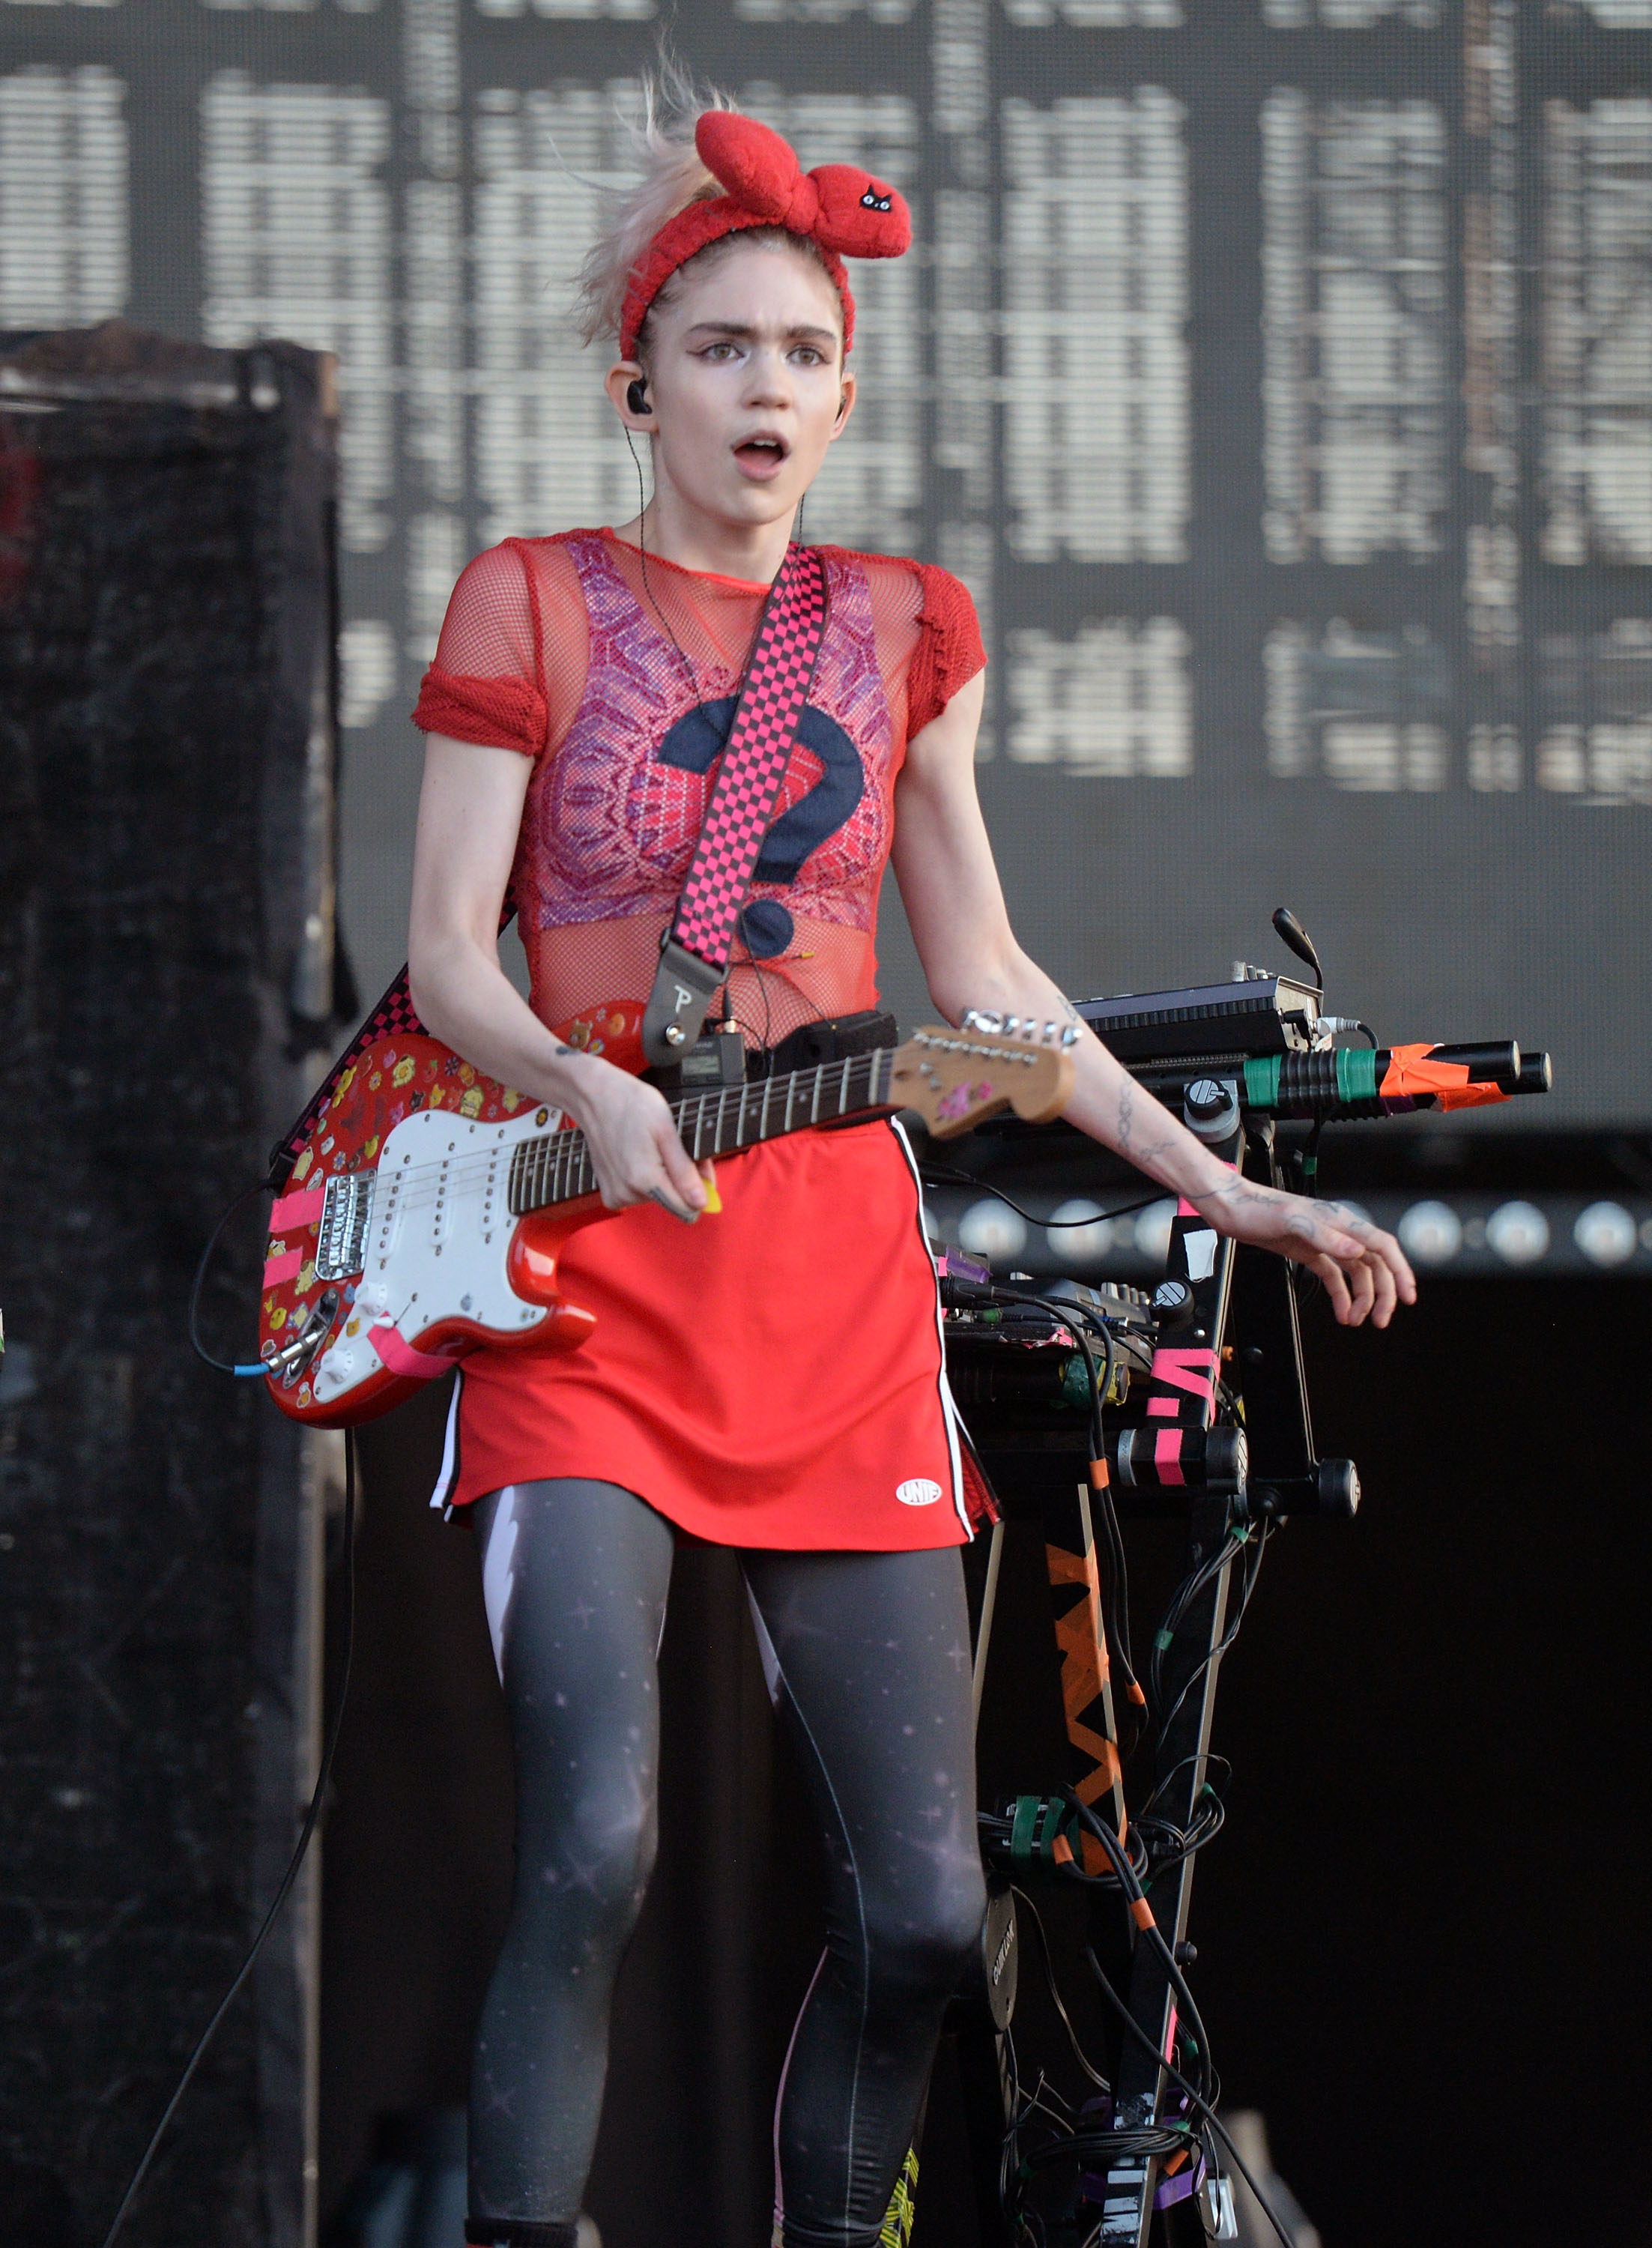 grimes with her guitar on stage